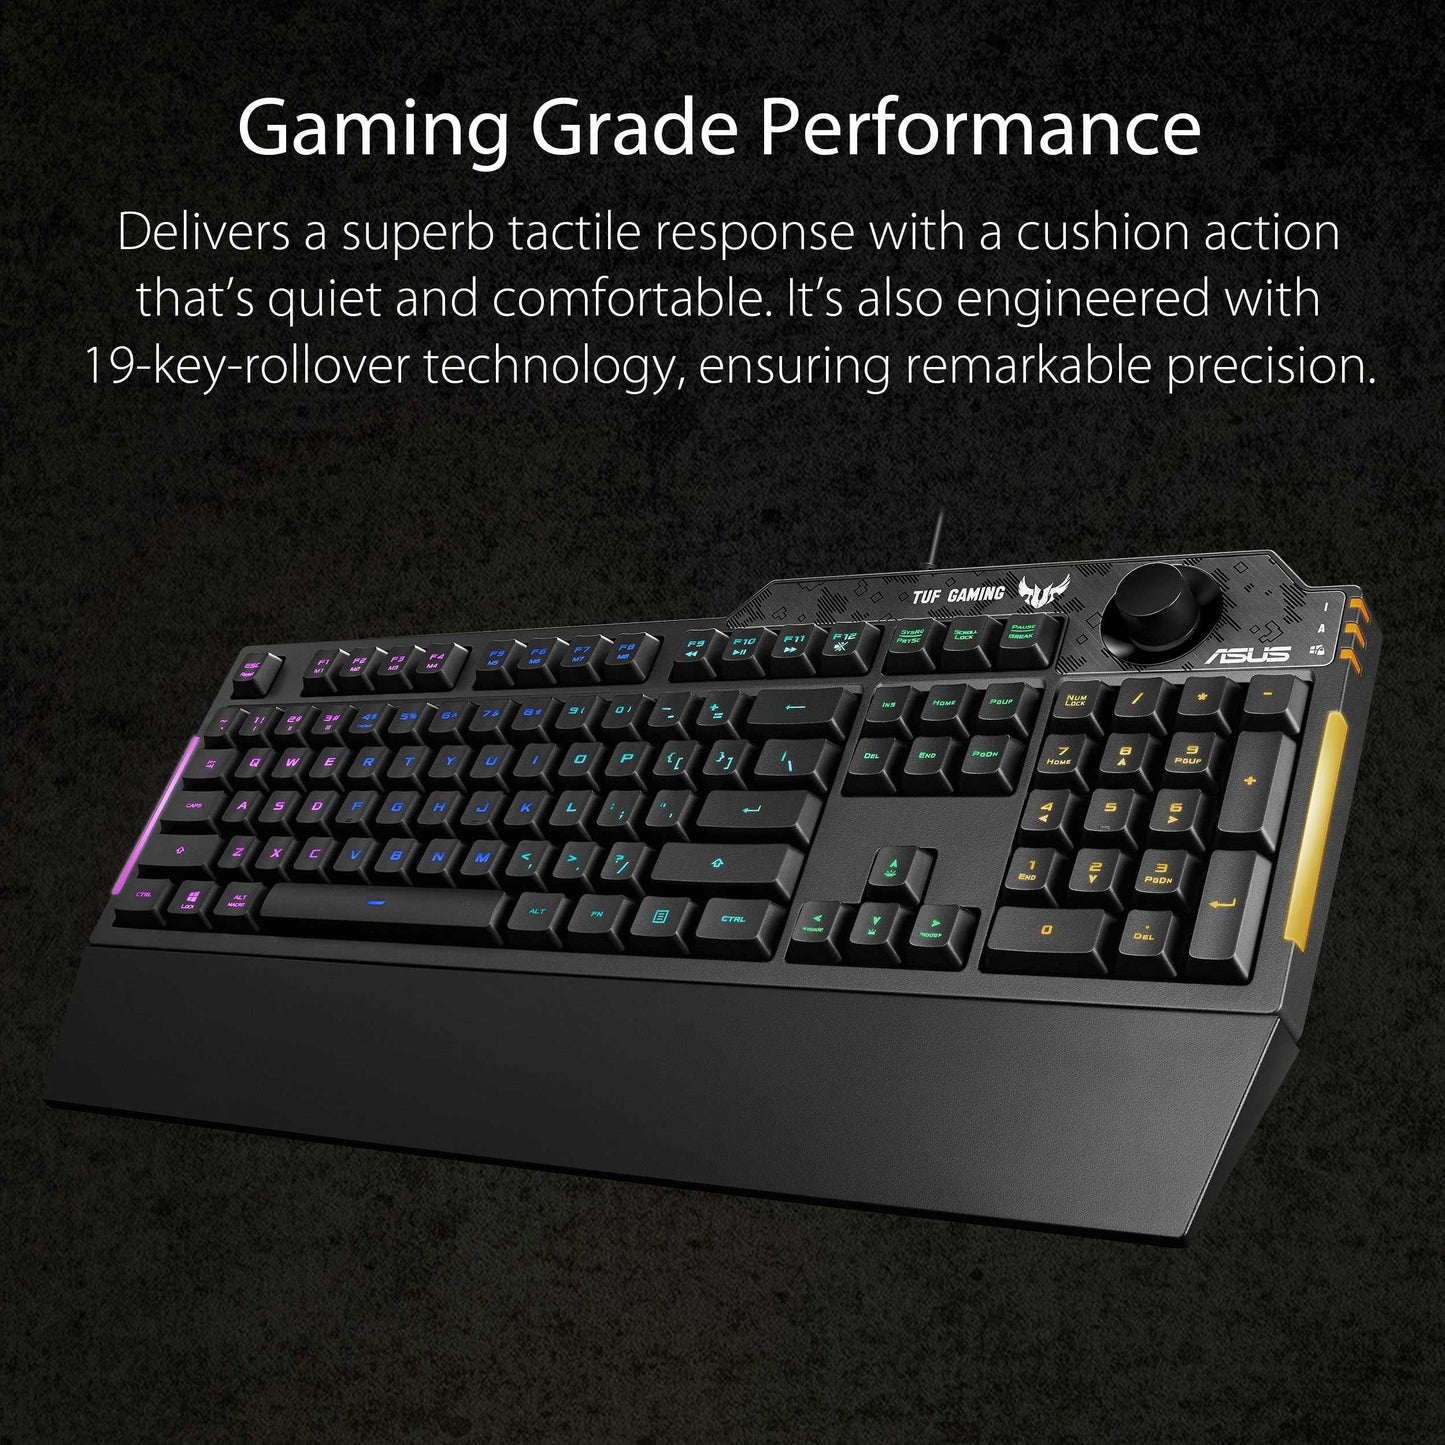 ASUS TUF Gaming K1 RGB keyboard with dedicated volume knob, spill-resistance, side light bar and Armoury Crate